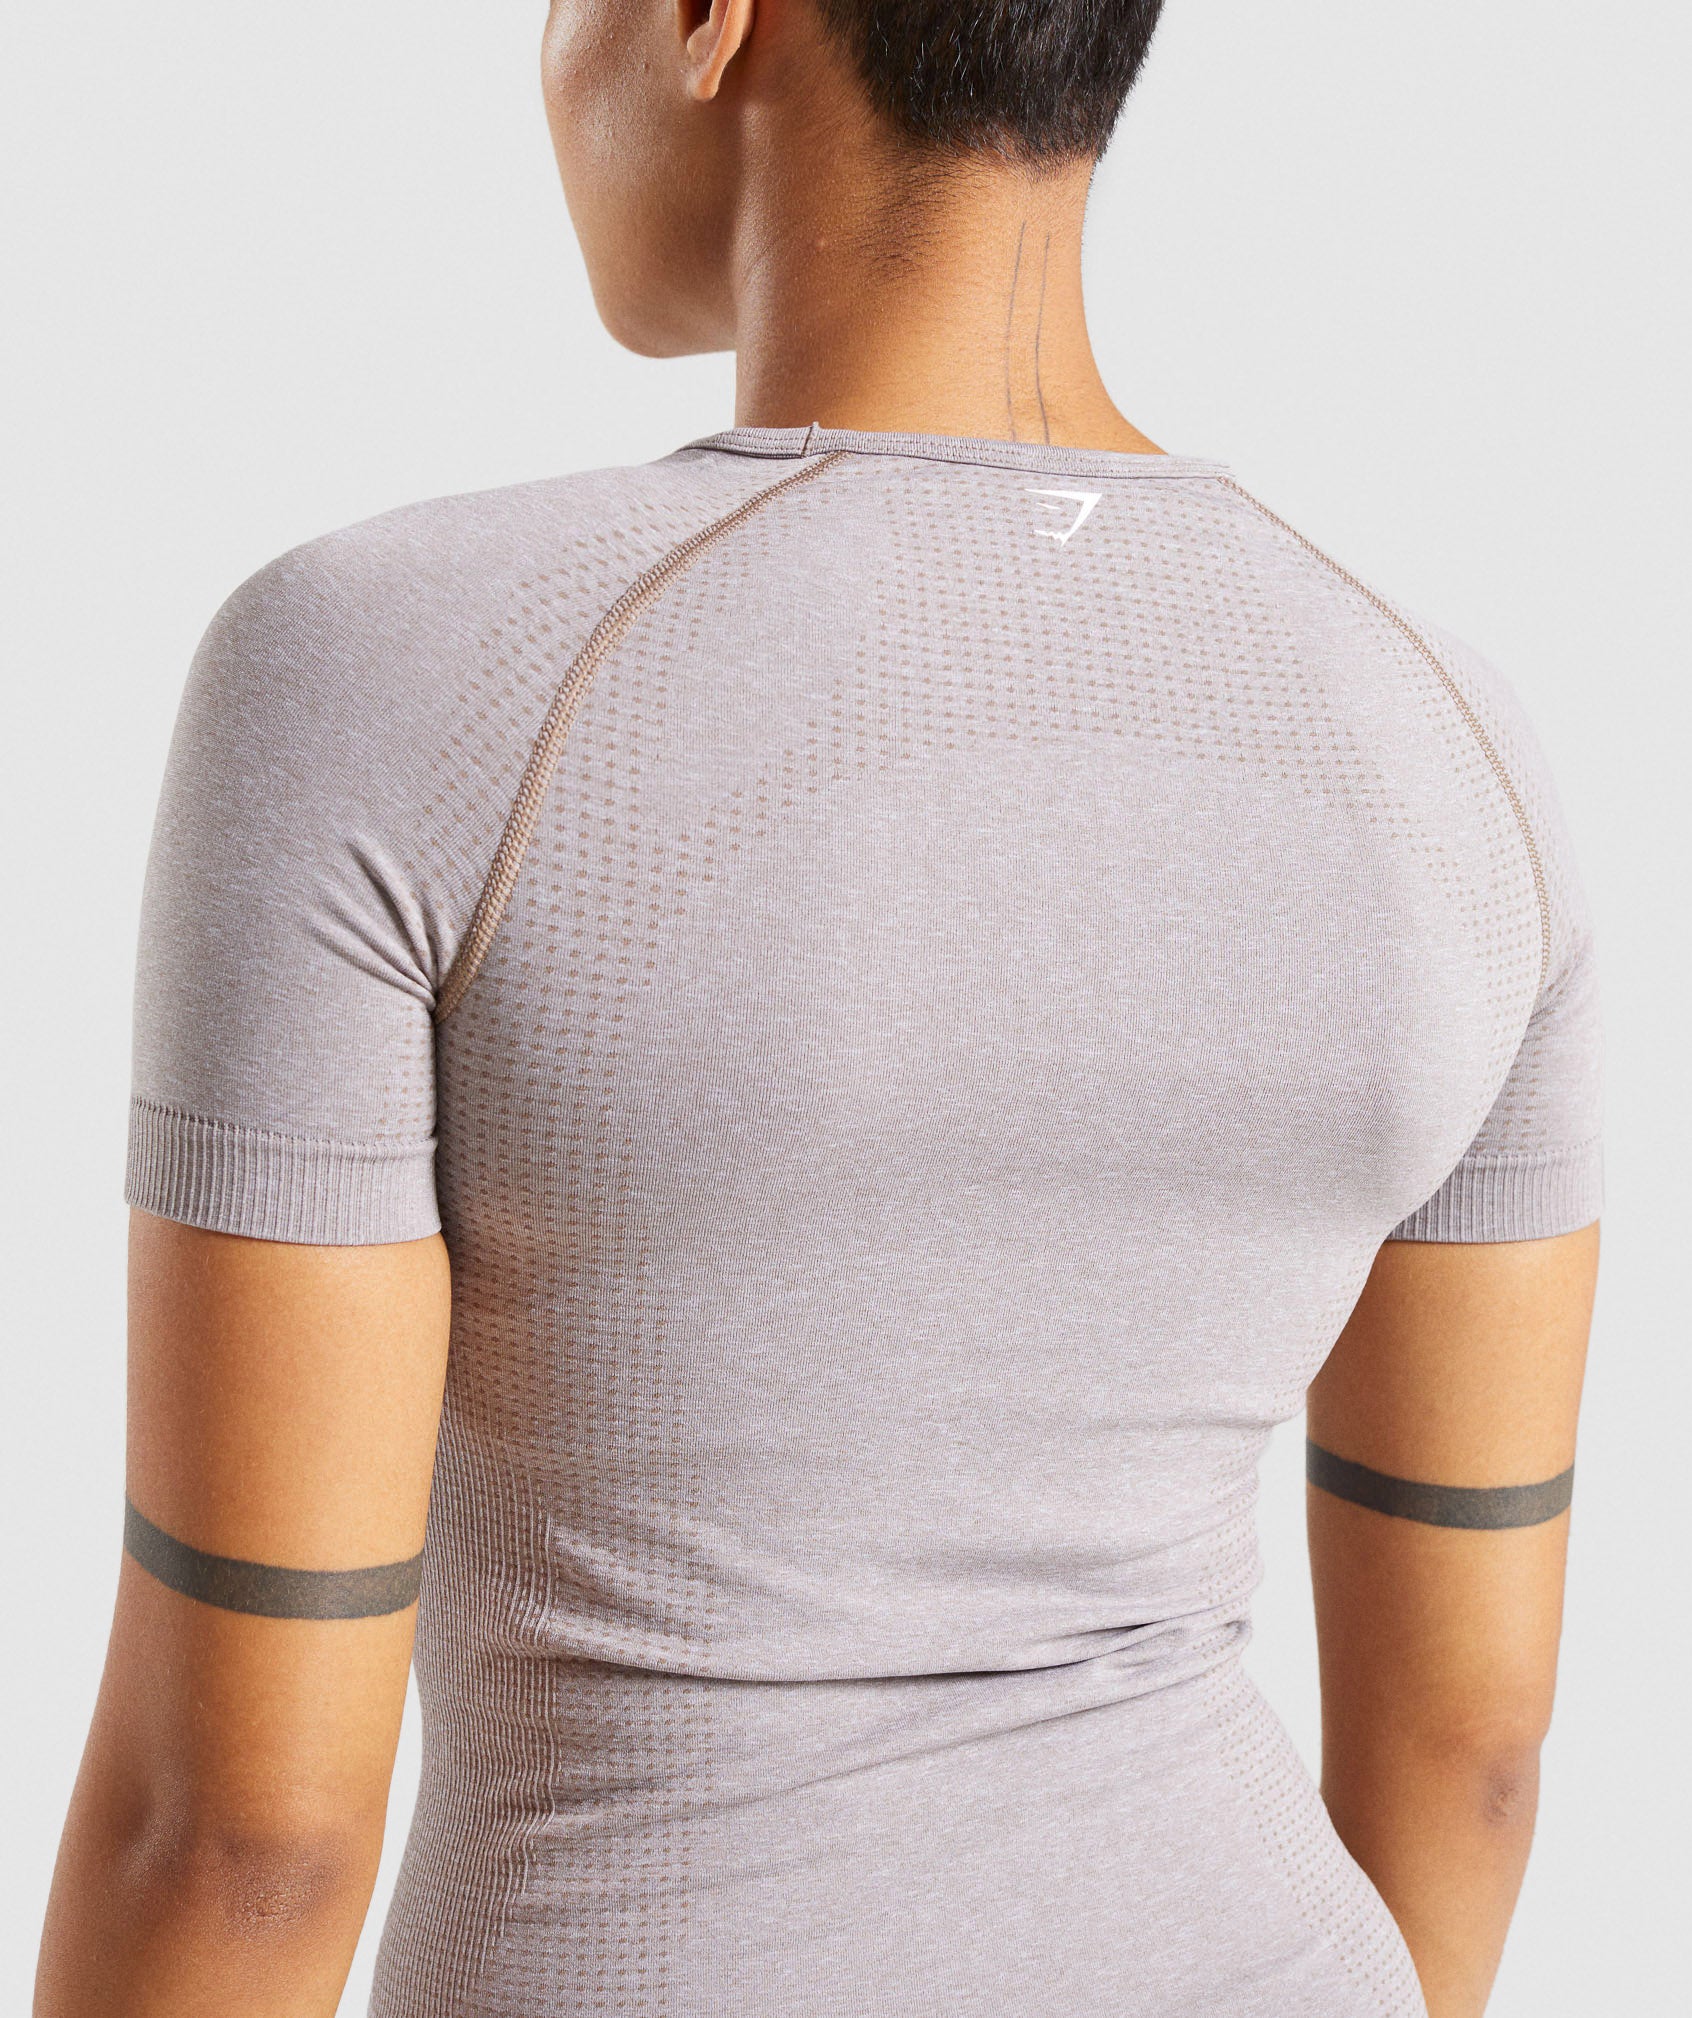 Vital Seamless 2.0 T-Shirt in Taupe Marl - view 6